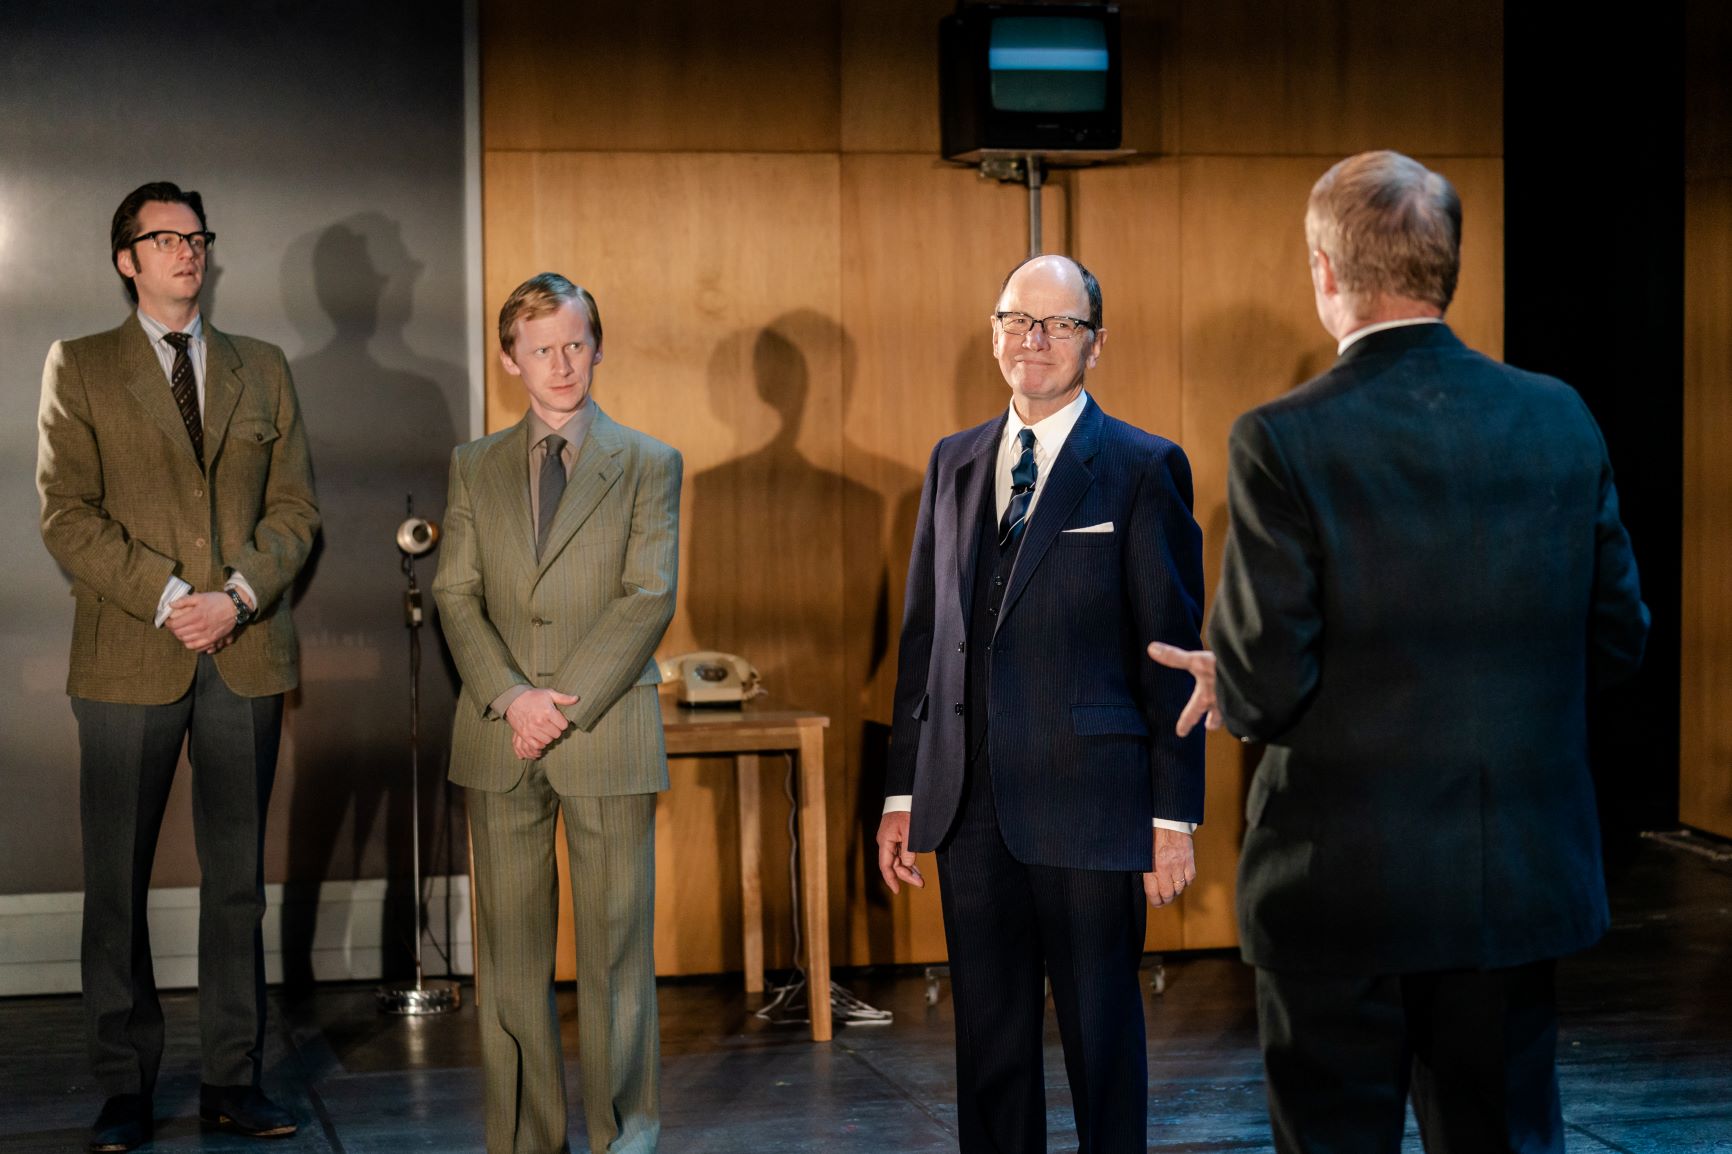 Ravens: Spassky vs Fischer review – game of chess is a cold war thriller, Stage